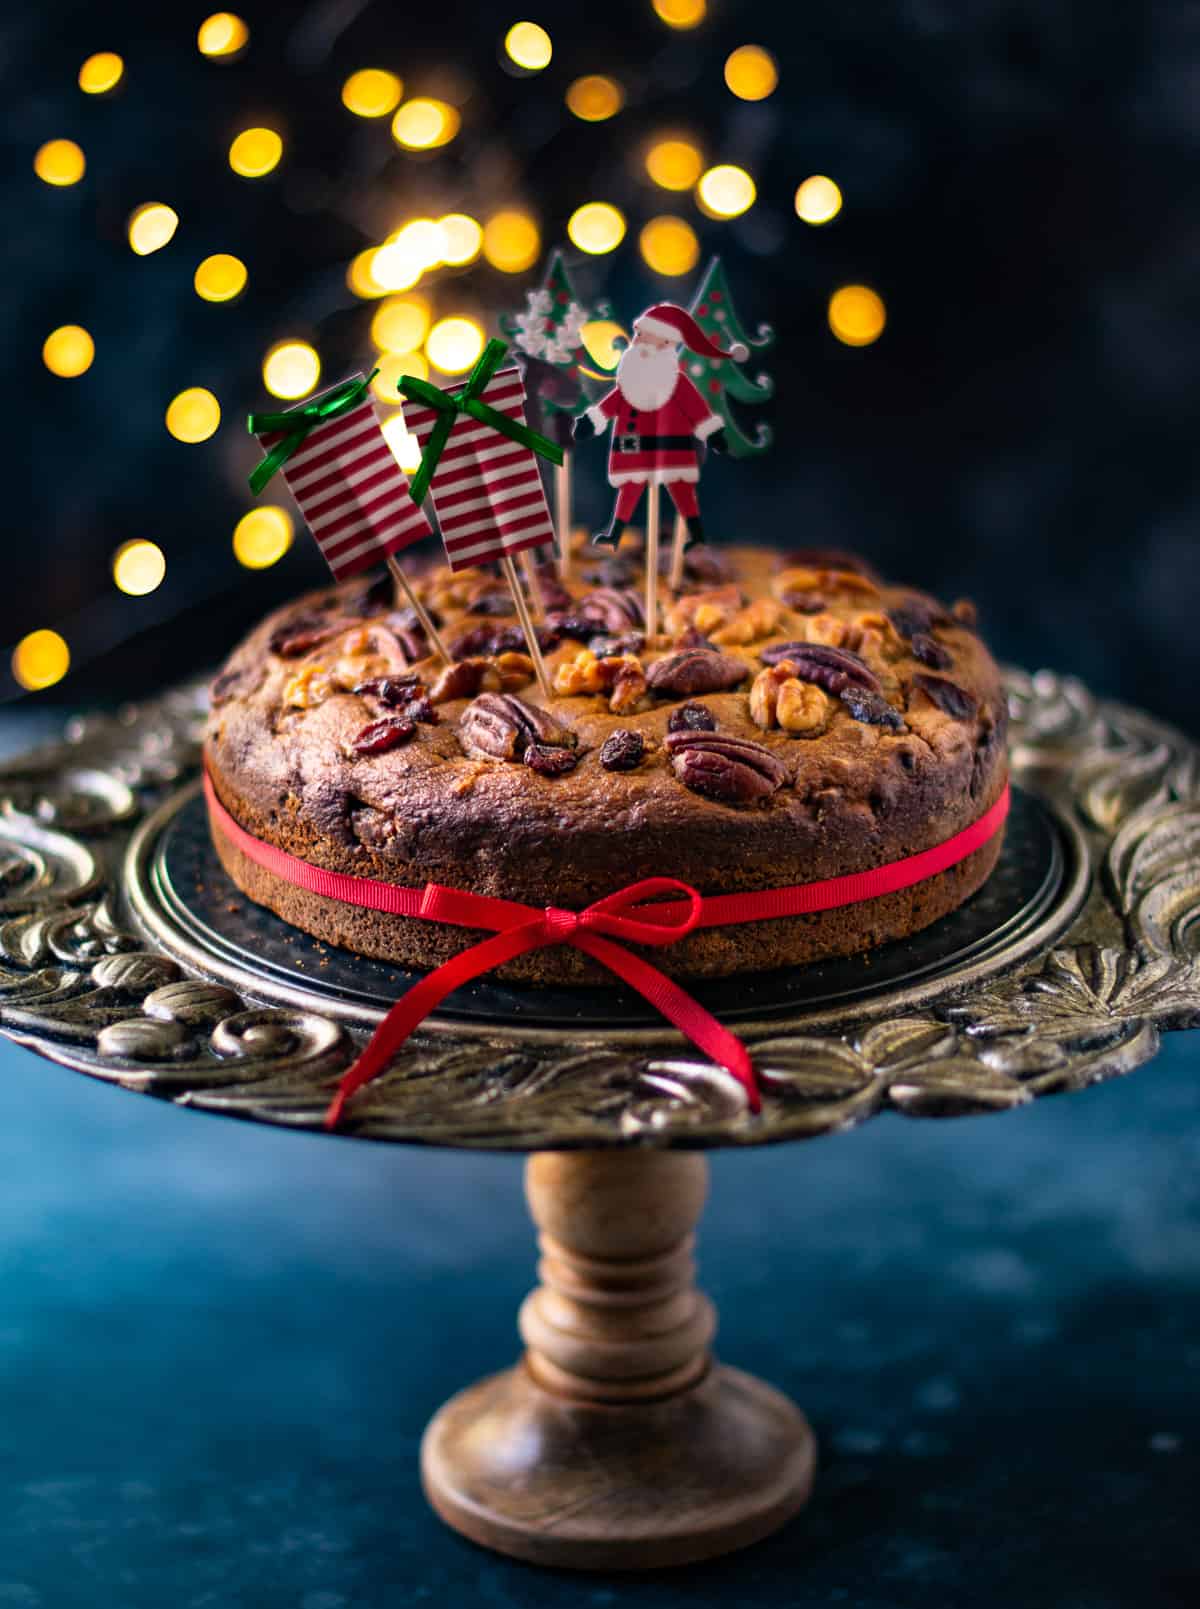 Tales of a Christmas cake  The Hindu